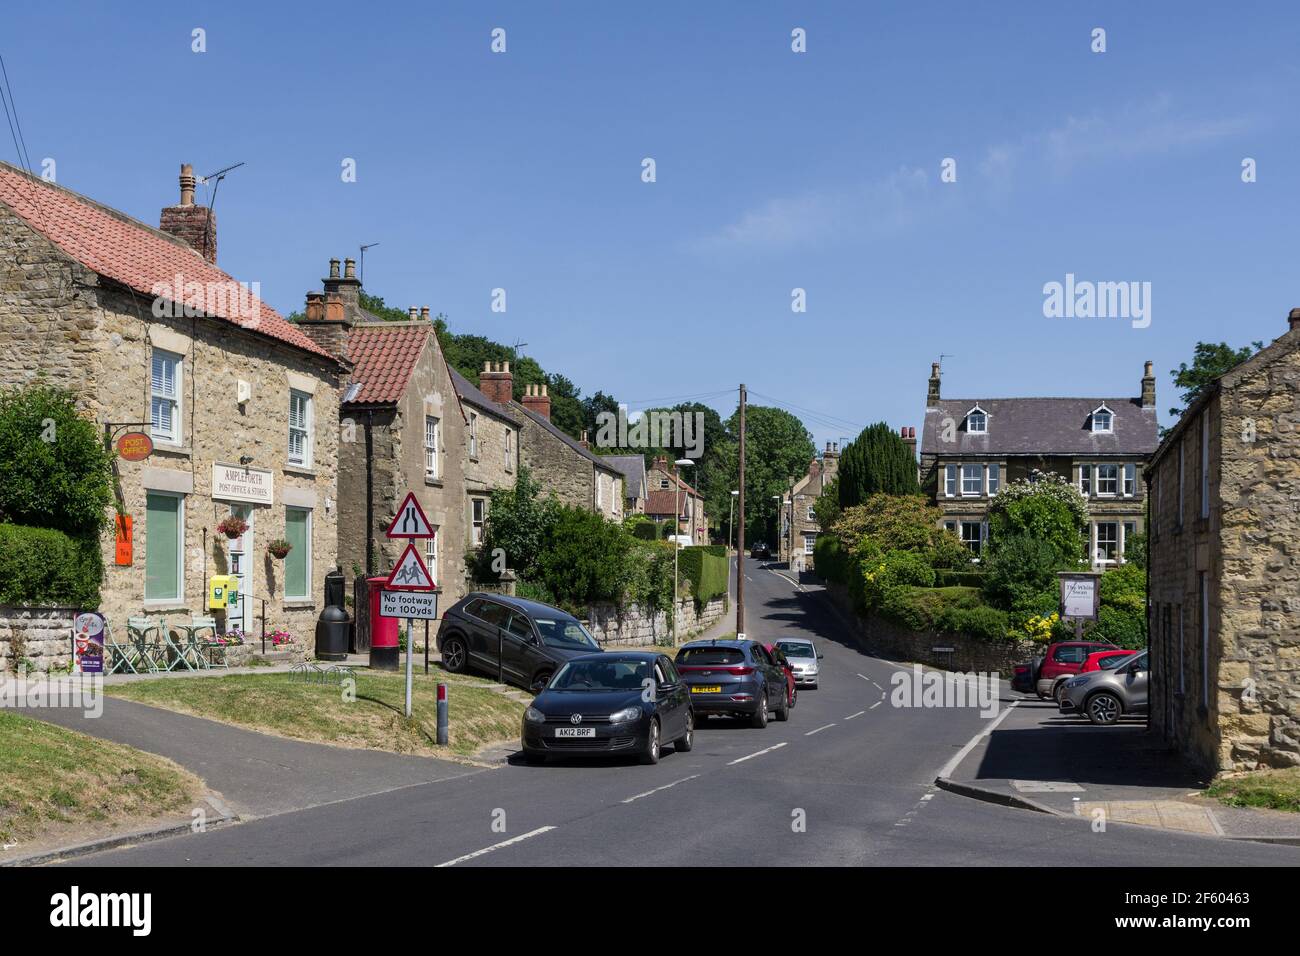 Street scene in summer in the village of Ampleforth, Yorkshire, UK; with the Post Office and Stores to the left hand side. Stock Photo